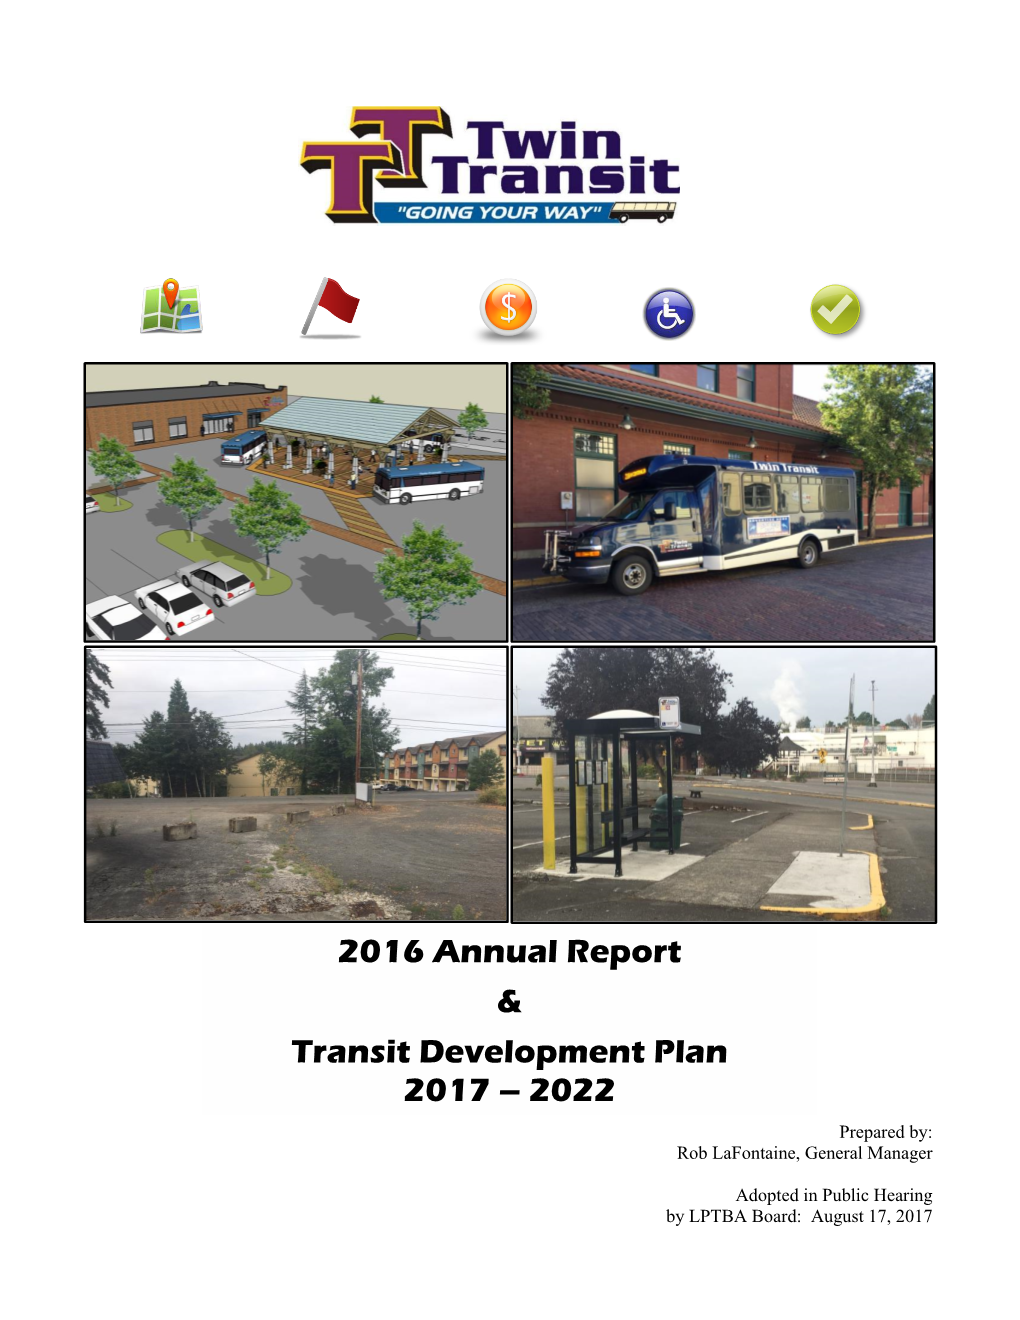 Twin Transit Has Prepared and Submitted This Annual Report for 2016 and a Subsequent Transit Development Plan (TDP) for Years 2017 Through 2022